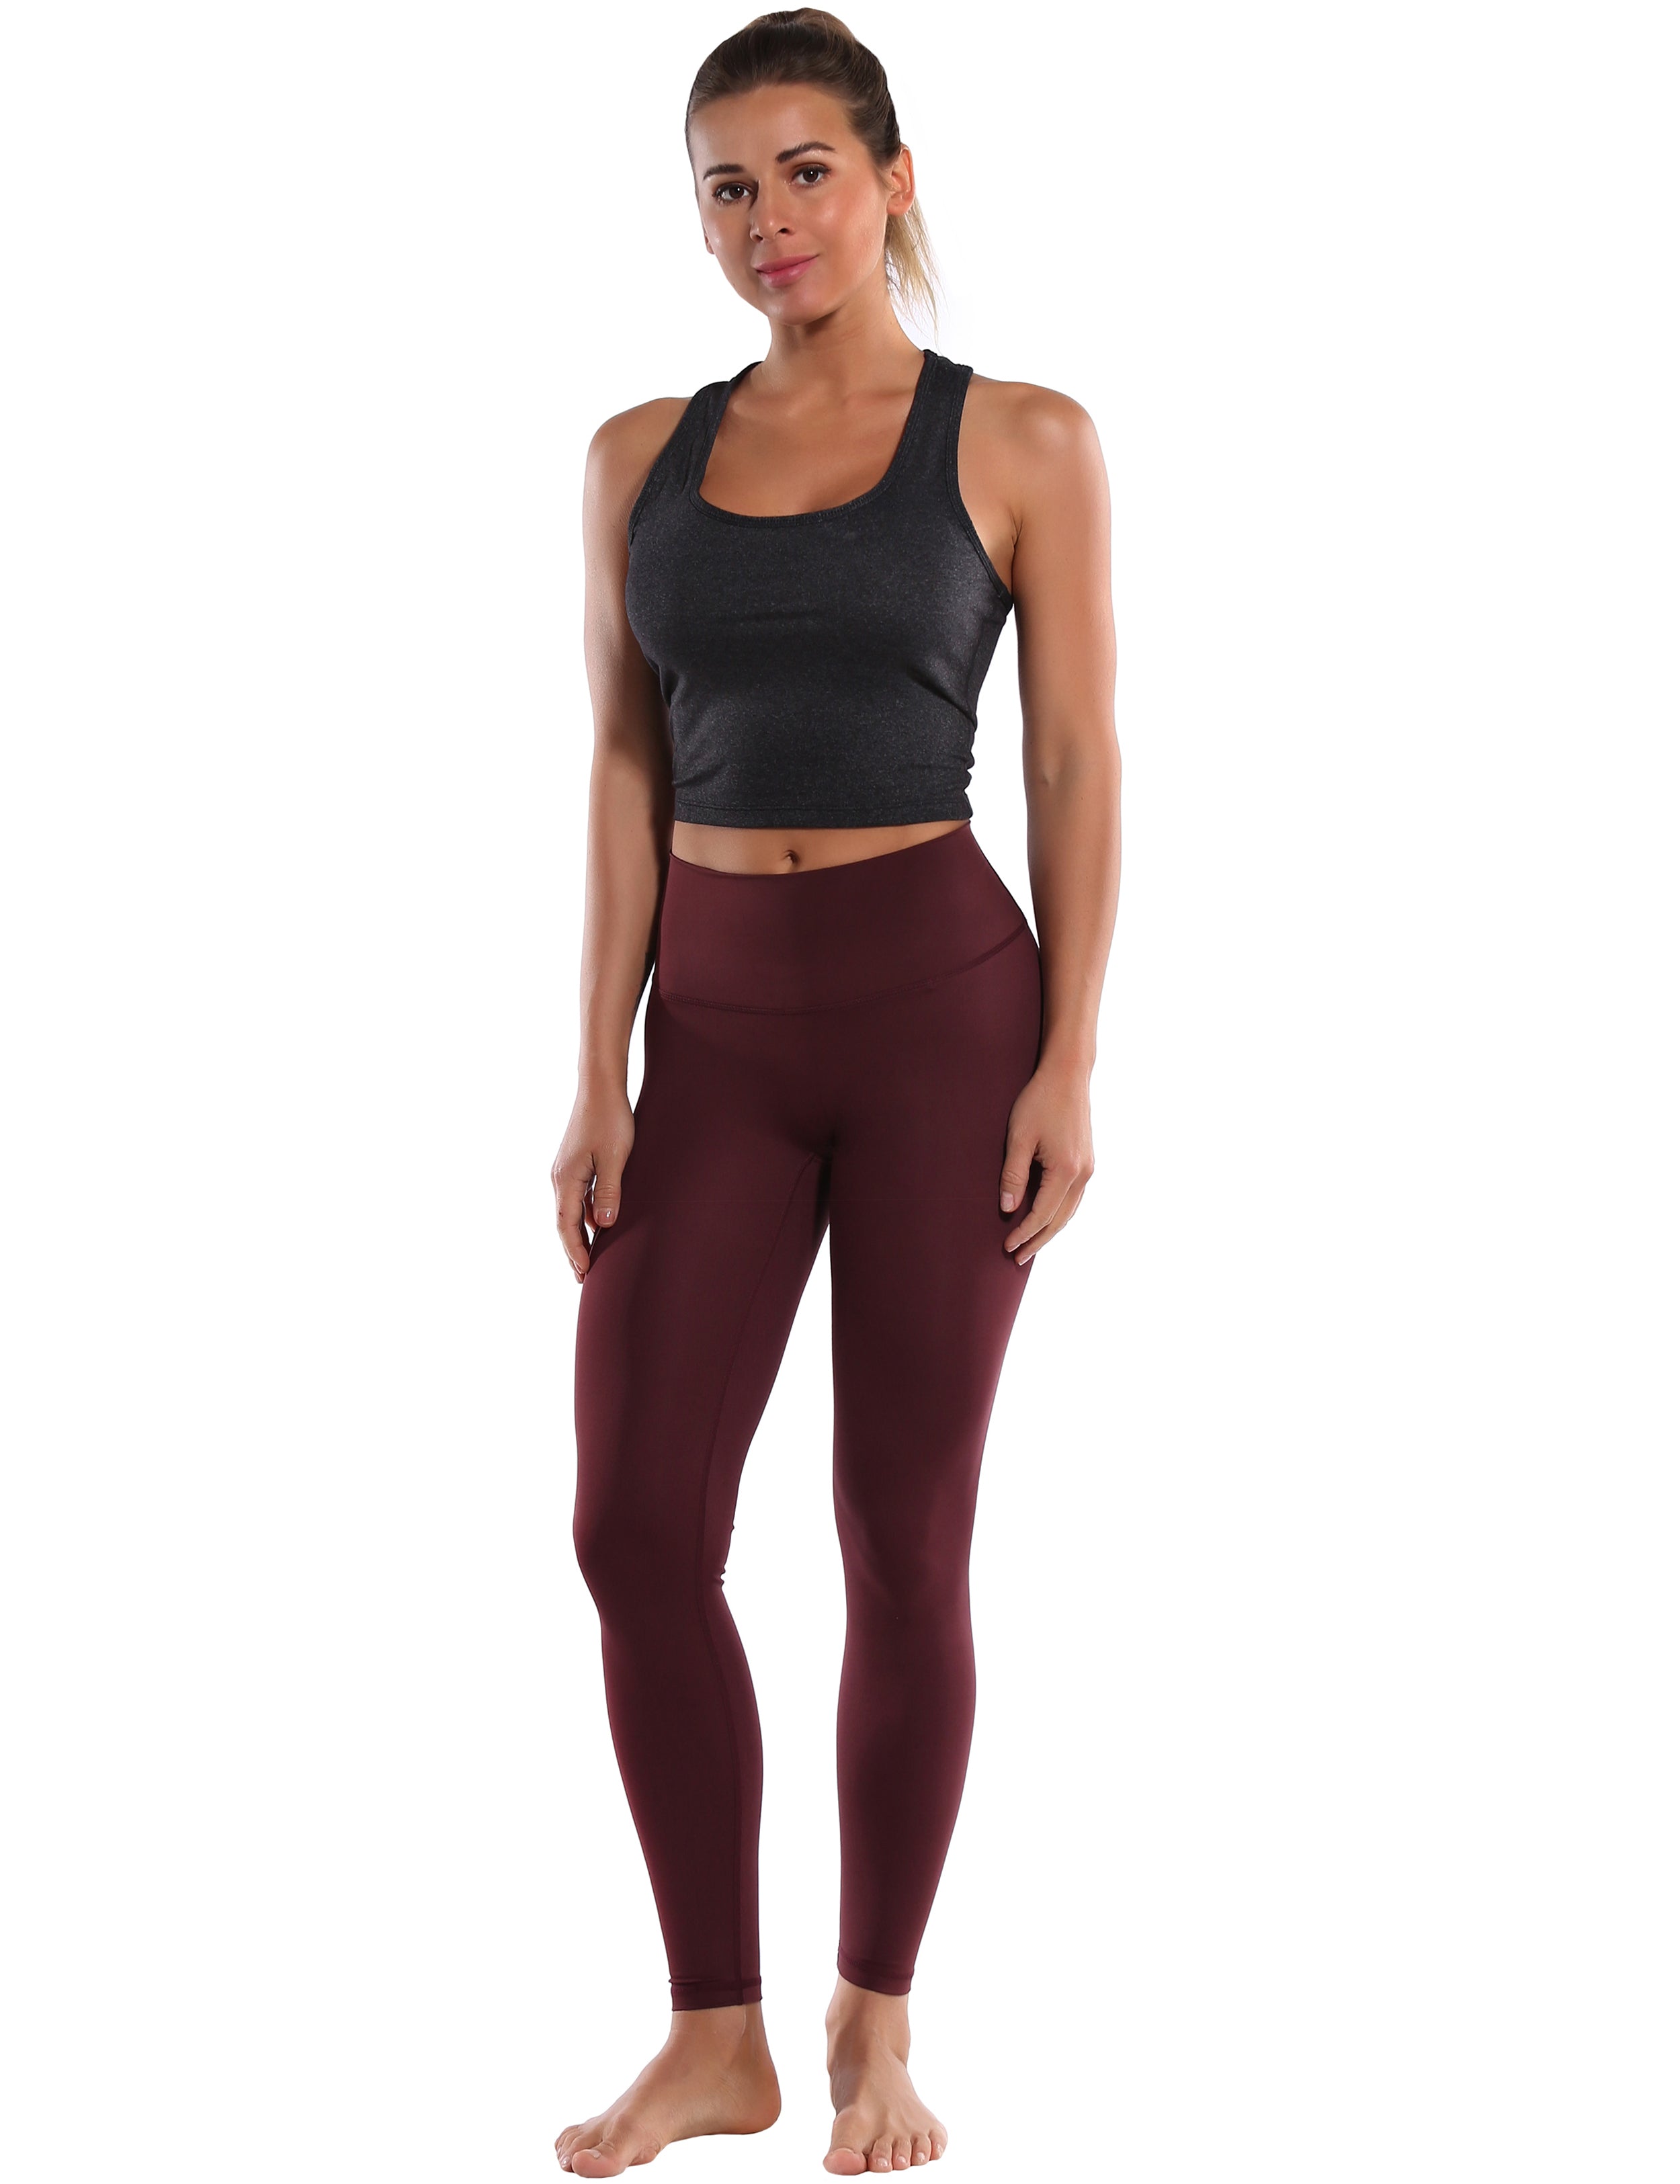 Racerback Athletic Crop Tank Tops heathercharcoal 92%Nylon/8%Spandex(Cotton Soft) Designed for Jogging Tight Fit So buttery soft, it feels weightless Sweat-wicking Four-way stretch Breathable Contours your body Sits below the waistband for moderate, everyday coverage